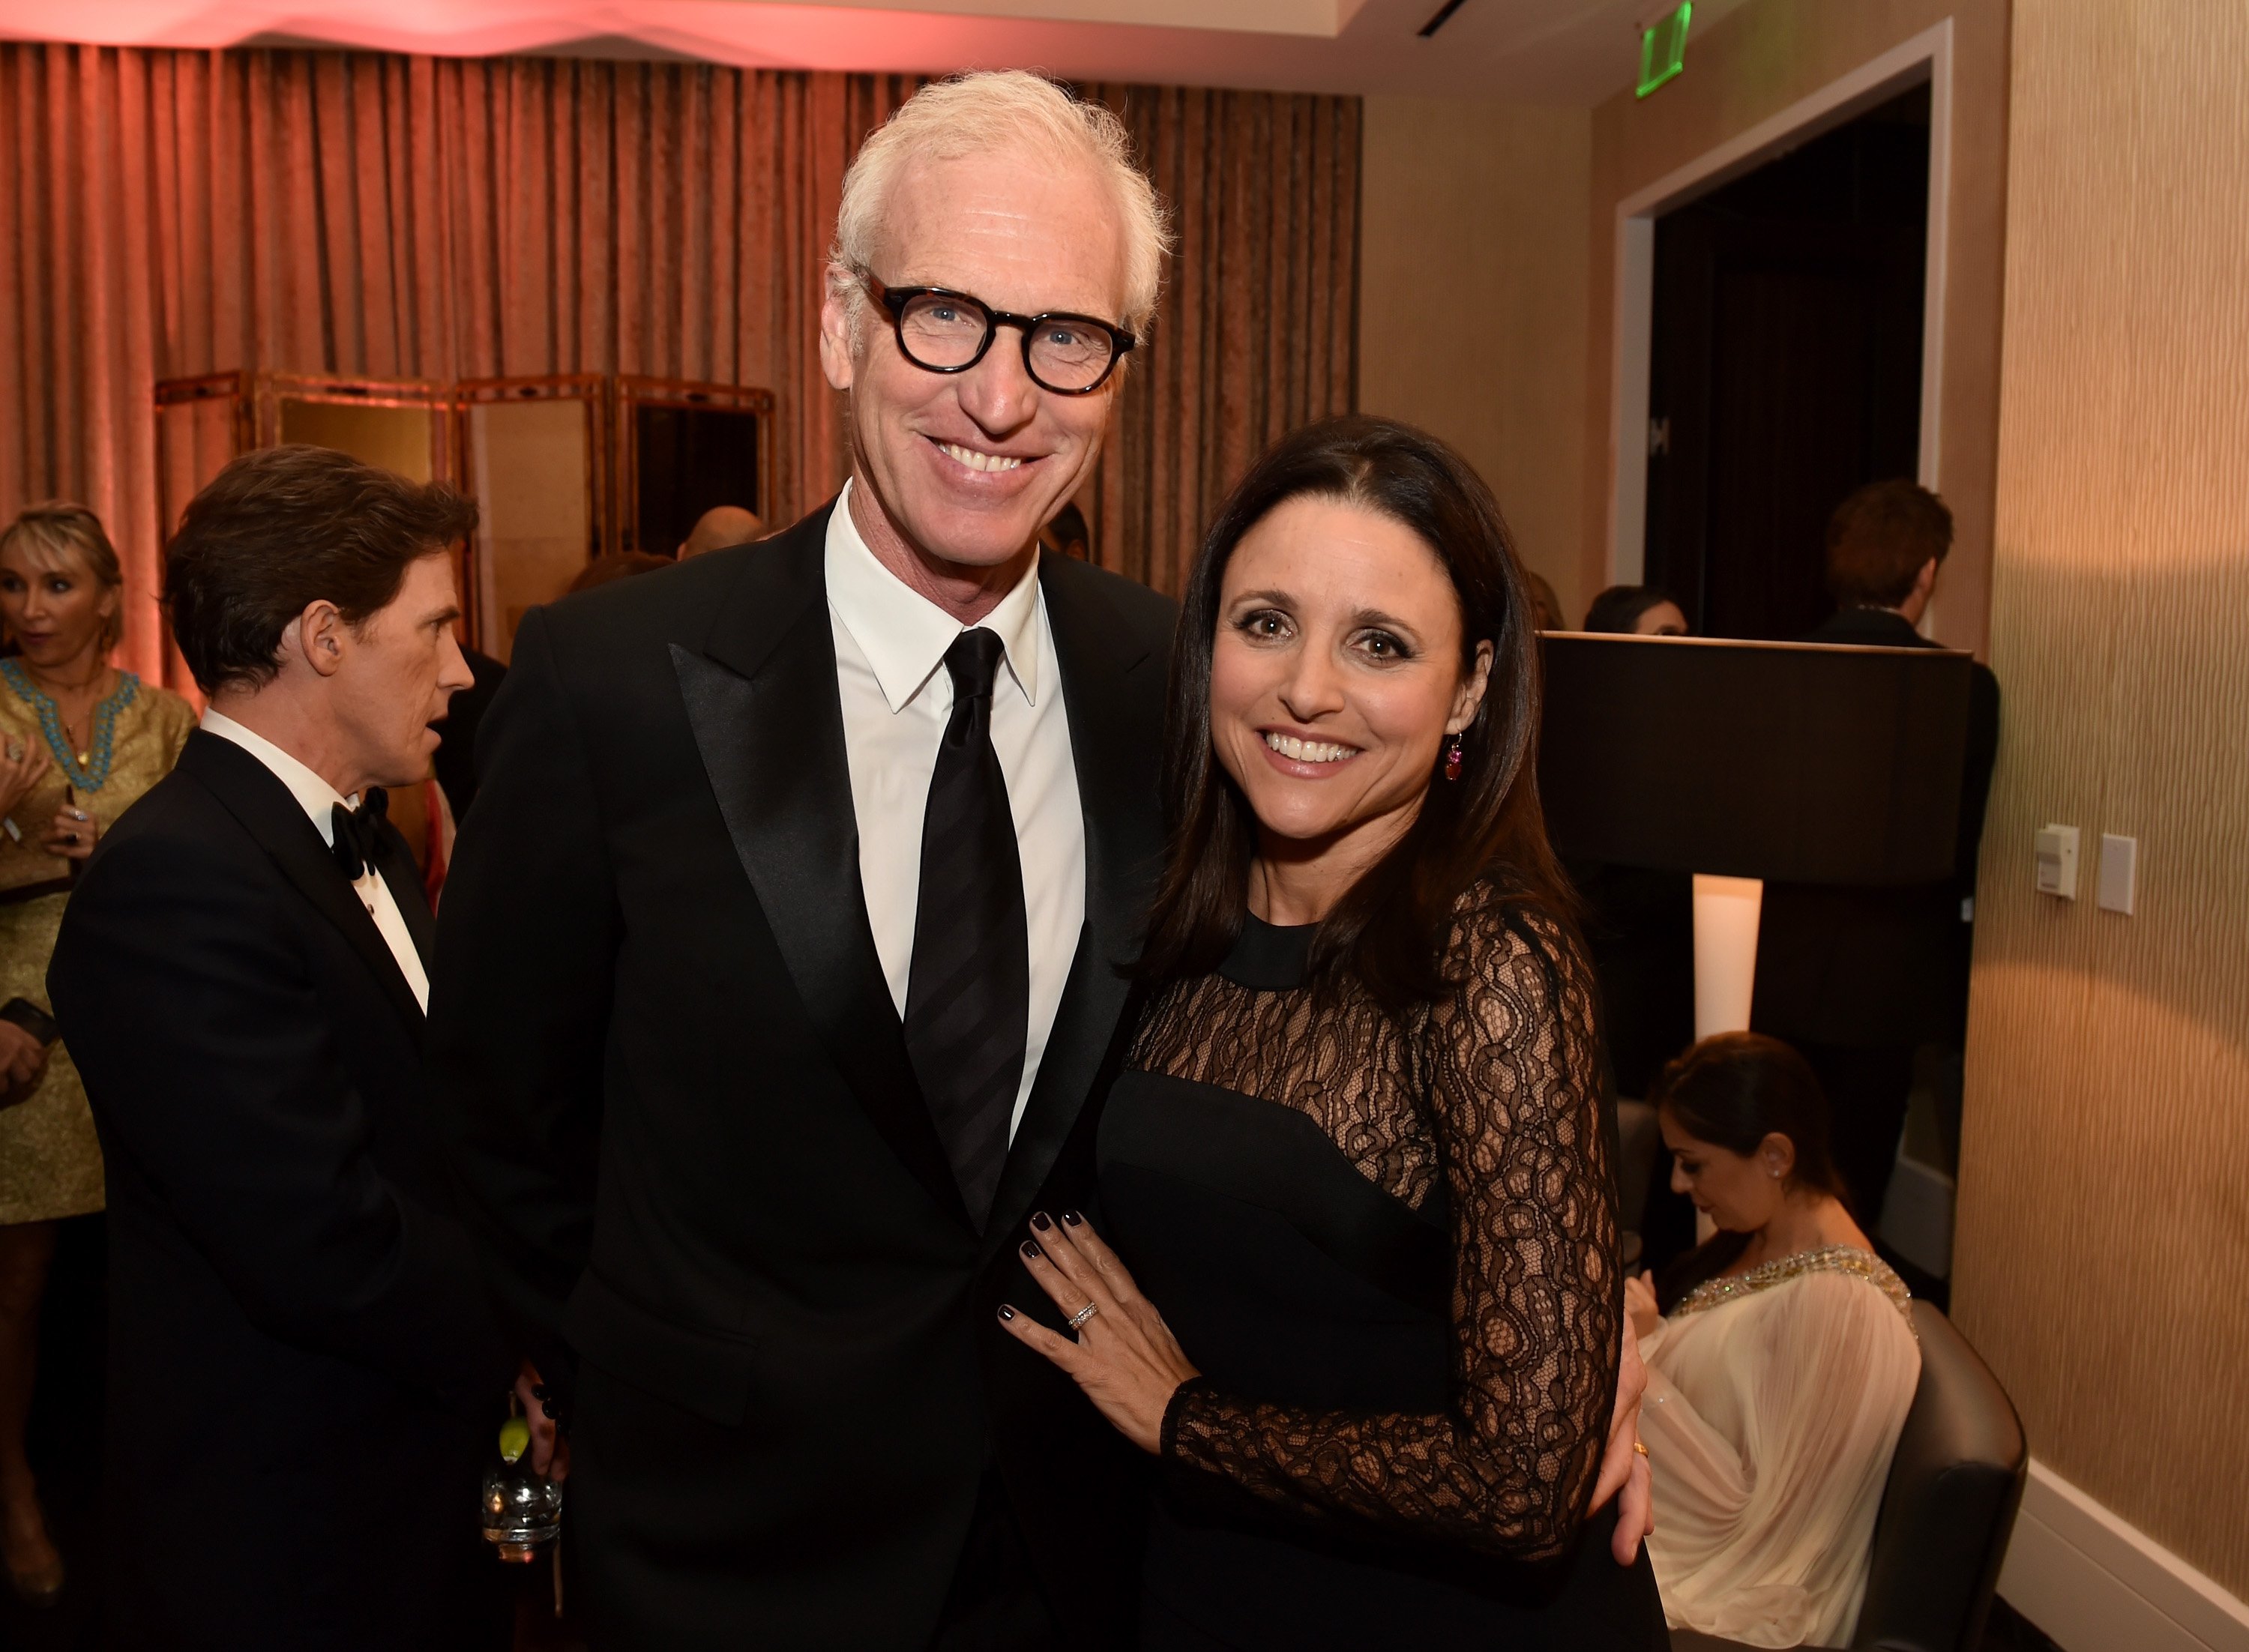 Brad Hall and Julia Louis-Dreyfus attend the BAFTA Los Angeles Jaguar Britannia Awards on October 30, 2014 in Beverly Hills, California | Photo: Getty Images